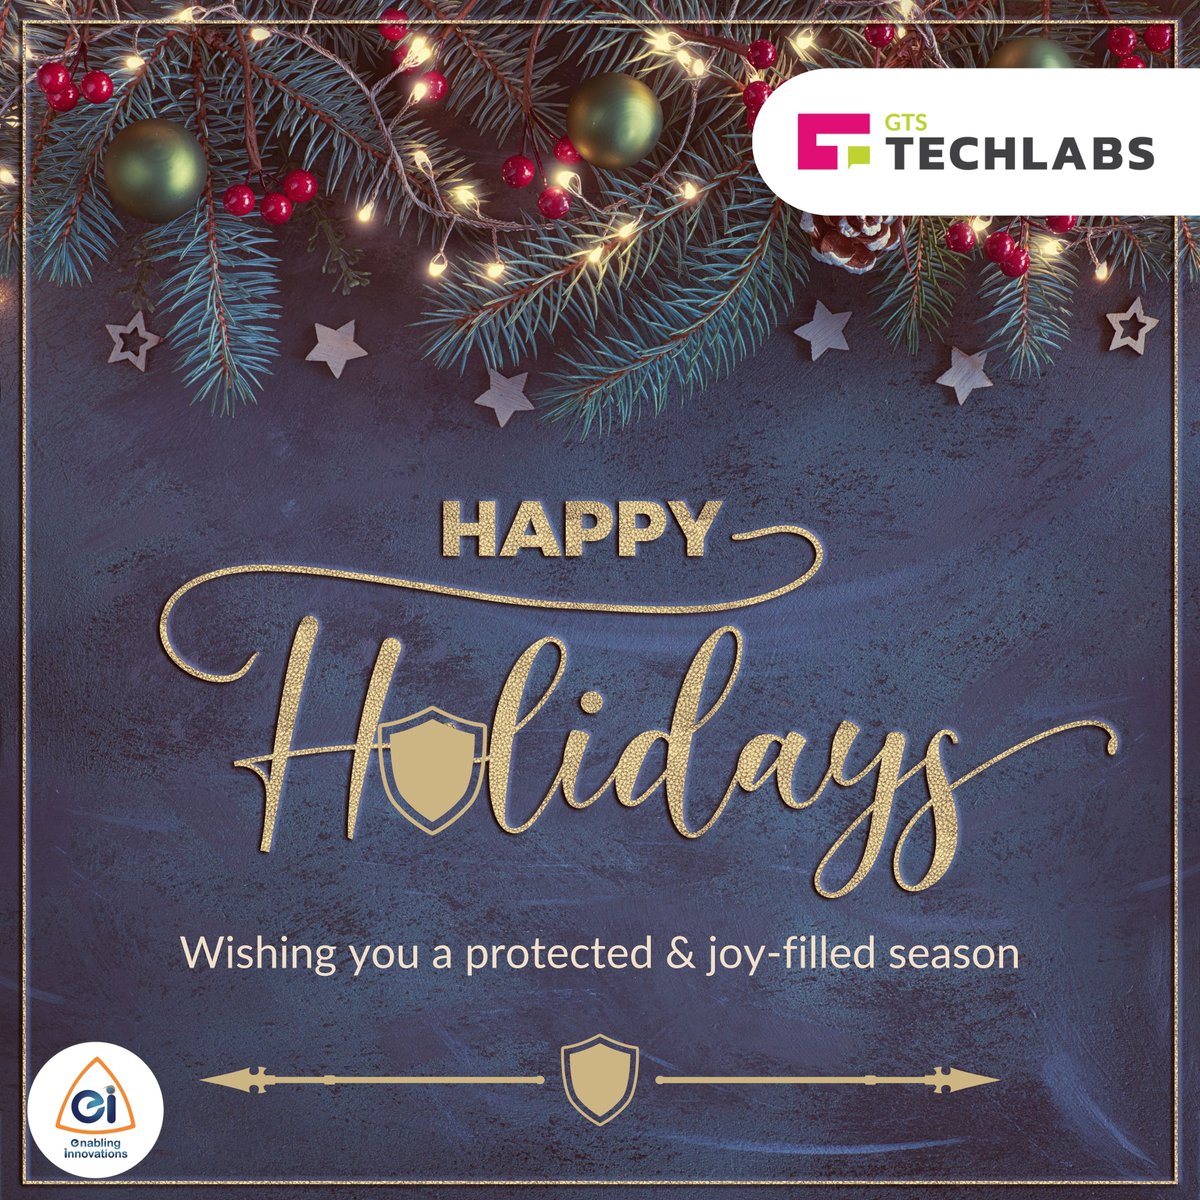 Wishing you a joyful holiday season filled with peace and prosperity! We're grateful for the trust telecom companies place in our firewall and fraud management solutions. 

#happyholidays #warmwishes